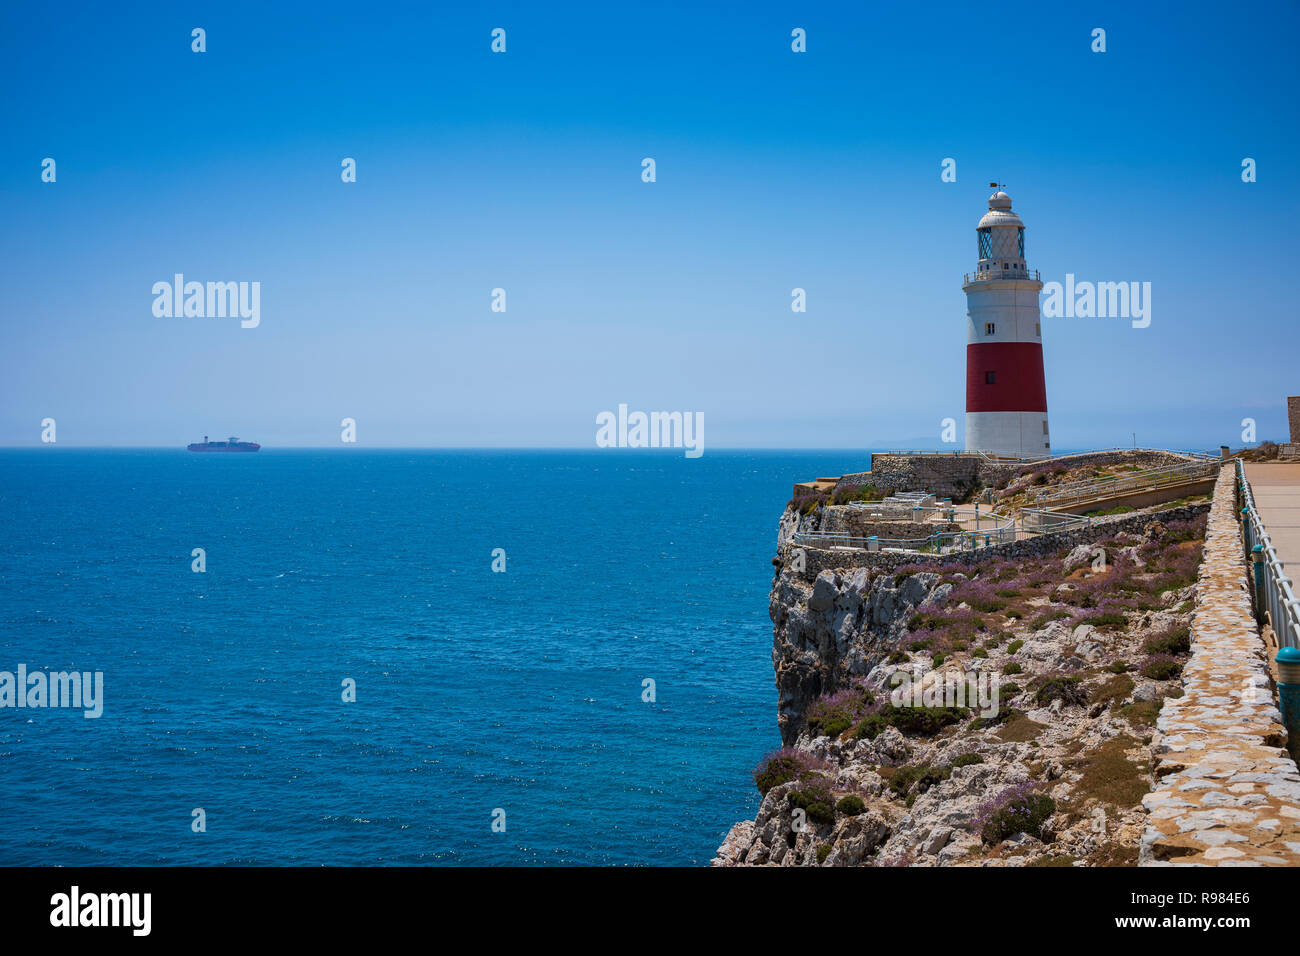 The Trinity House Lighthouse, built in 1841, is located at Gibraltar's southernmost point offers dramatic ocean views on a cloudless summer day. Stock Photo